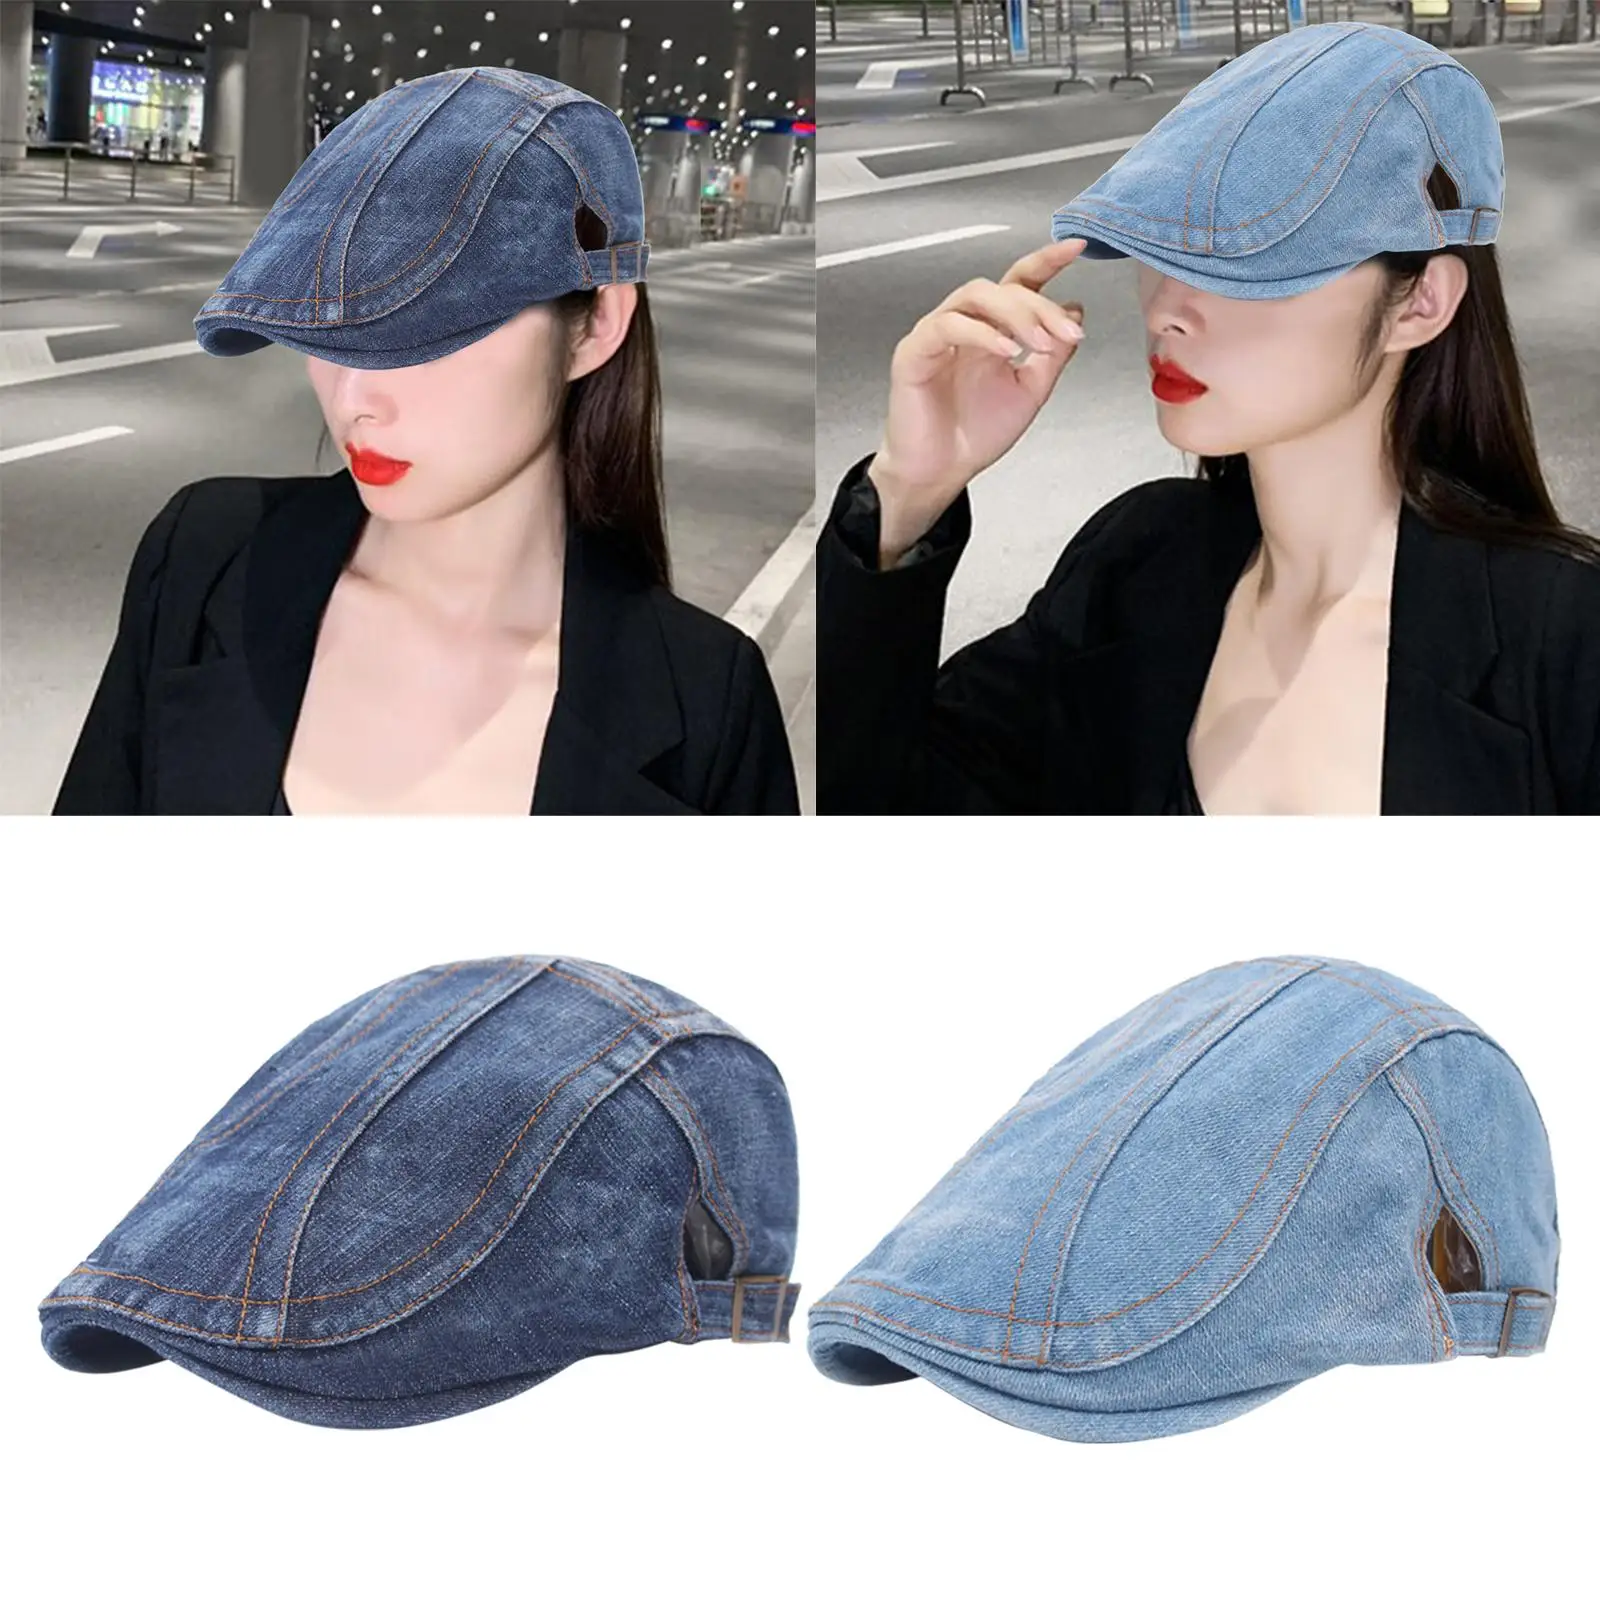 Unisex Newsboy Hat/ Flat  Hunting Ivy Snap Driving Cabbie  Caps/ for Men Women Washable Washed Jean/